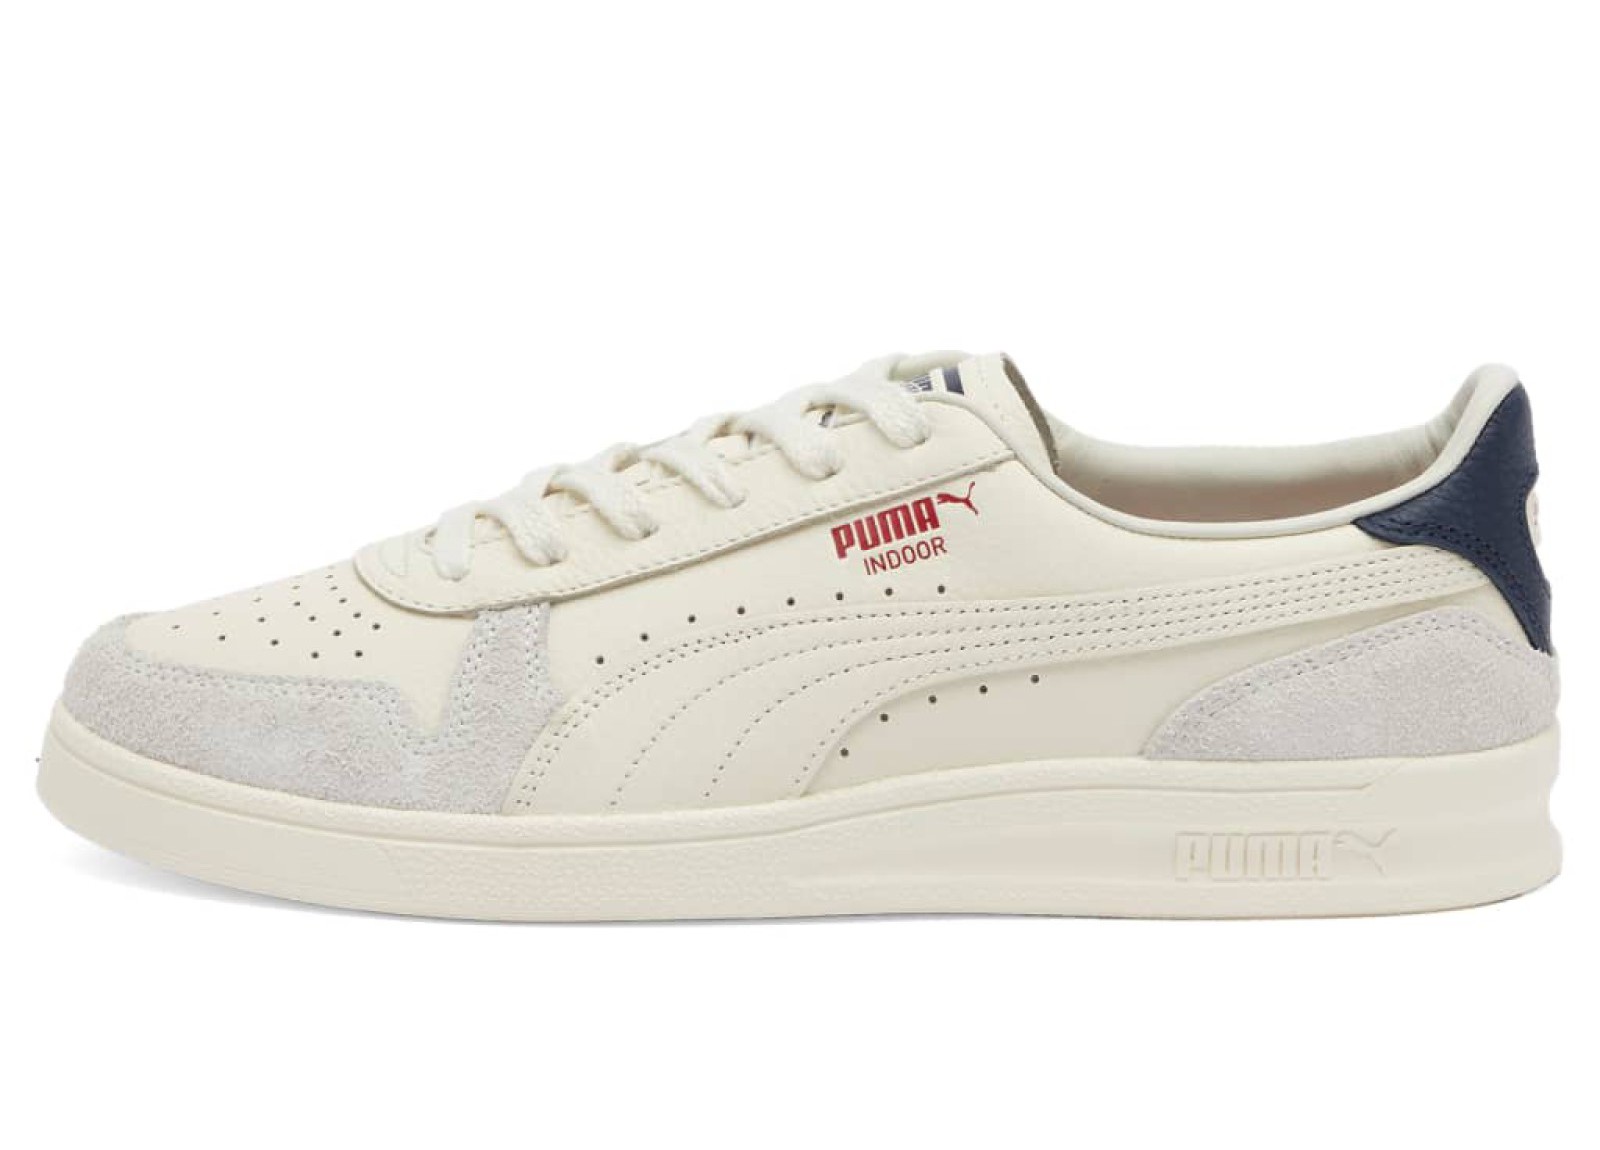 Puma Indoor
Frosted Ivory / Vapor Gray